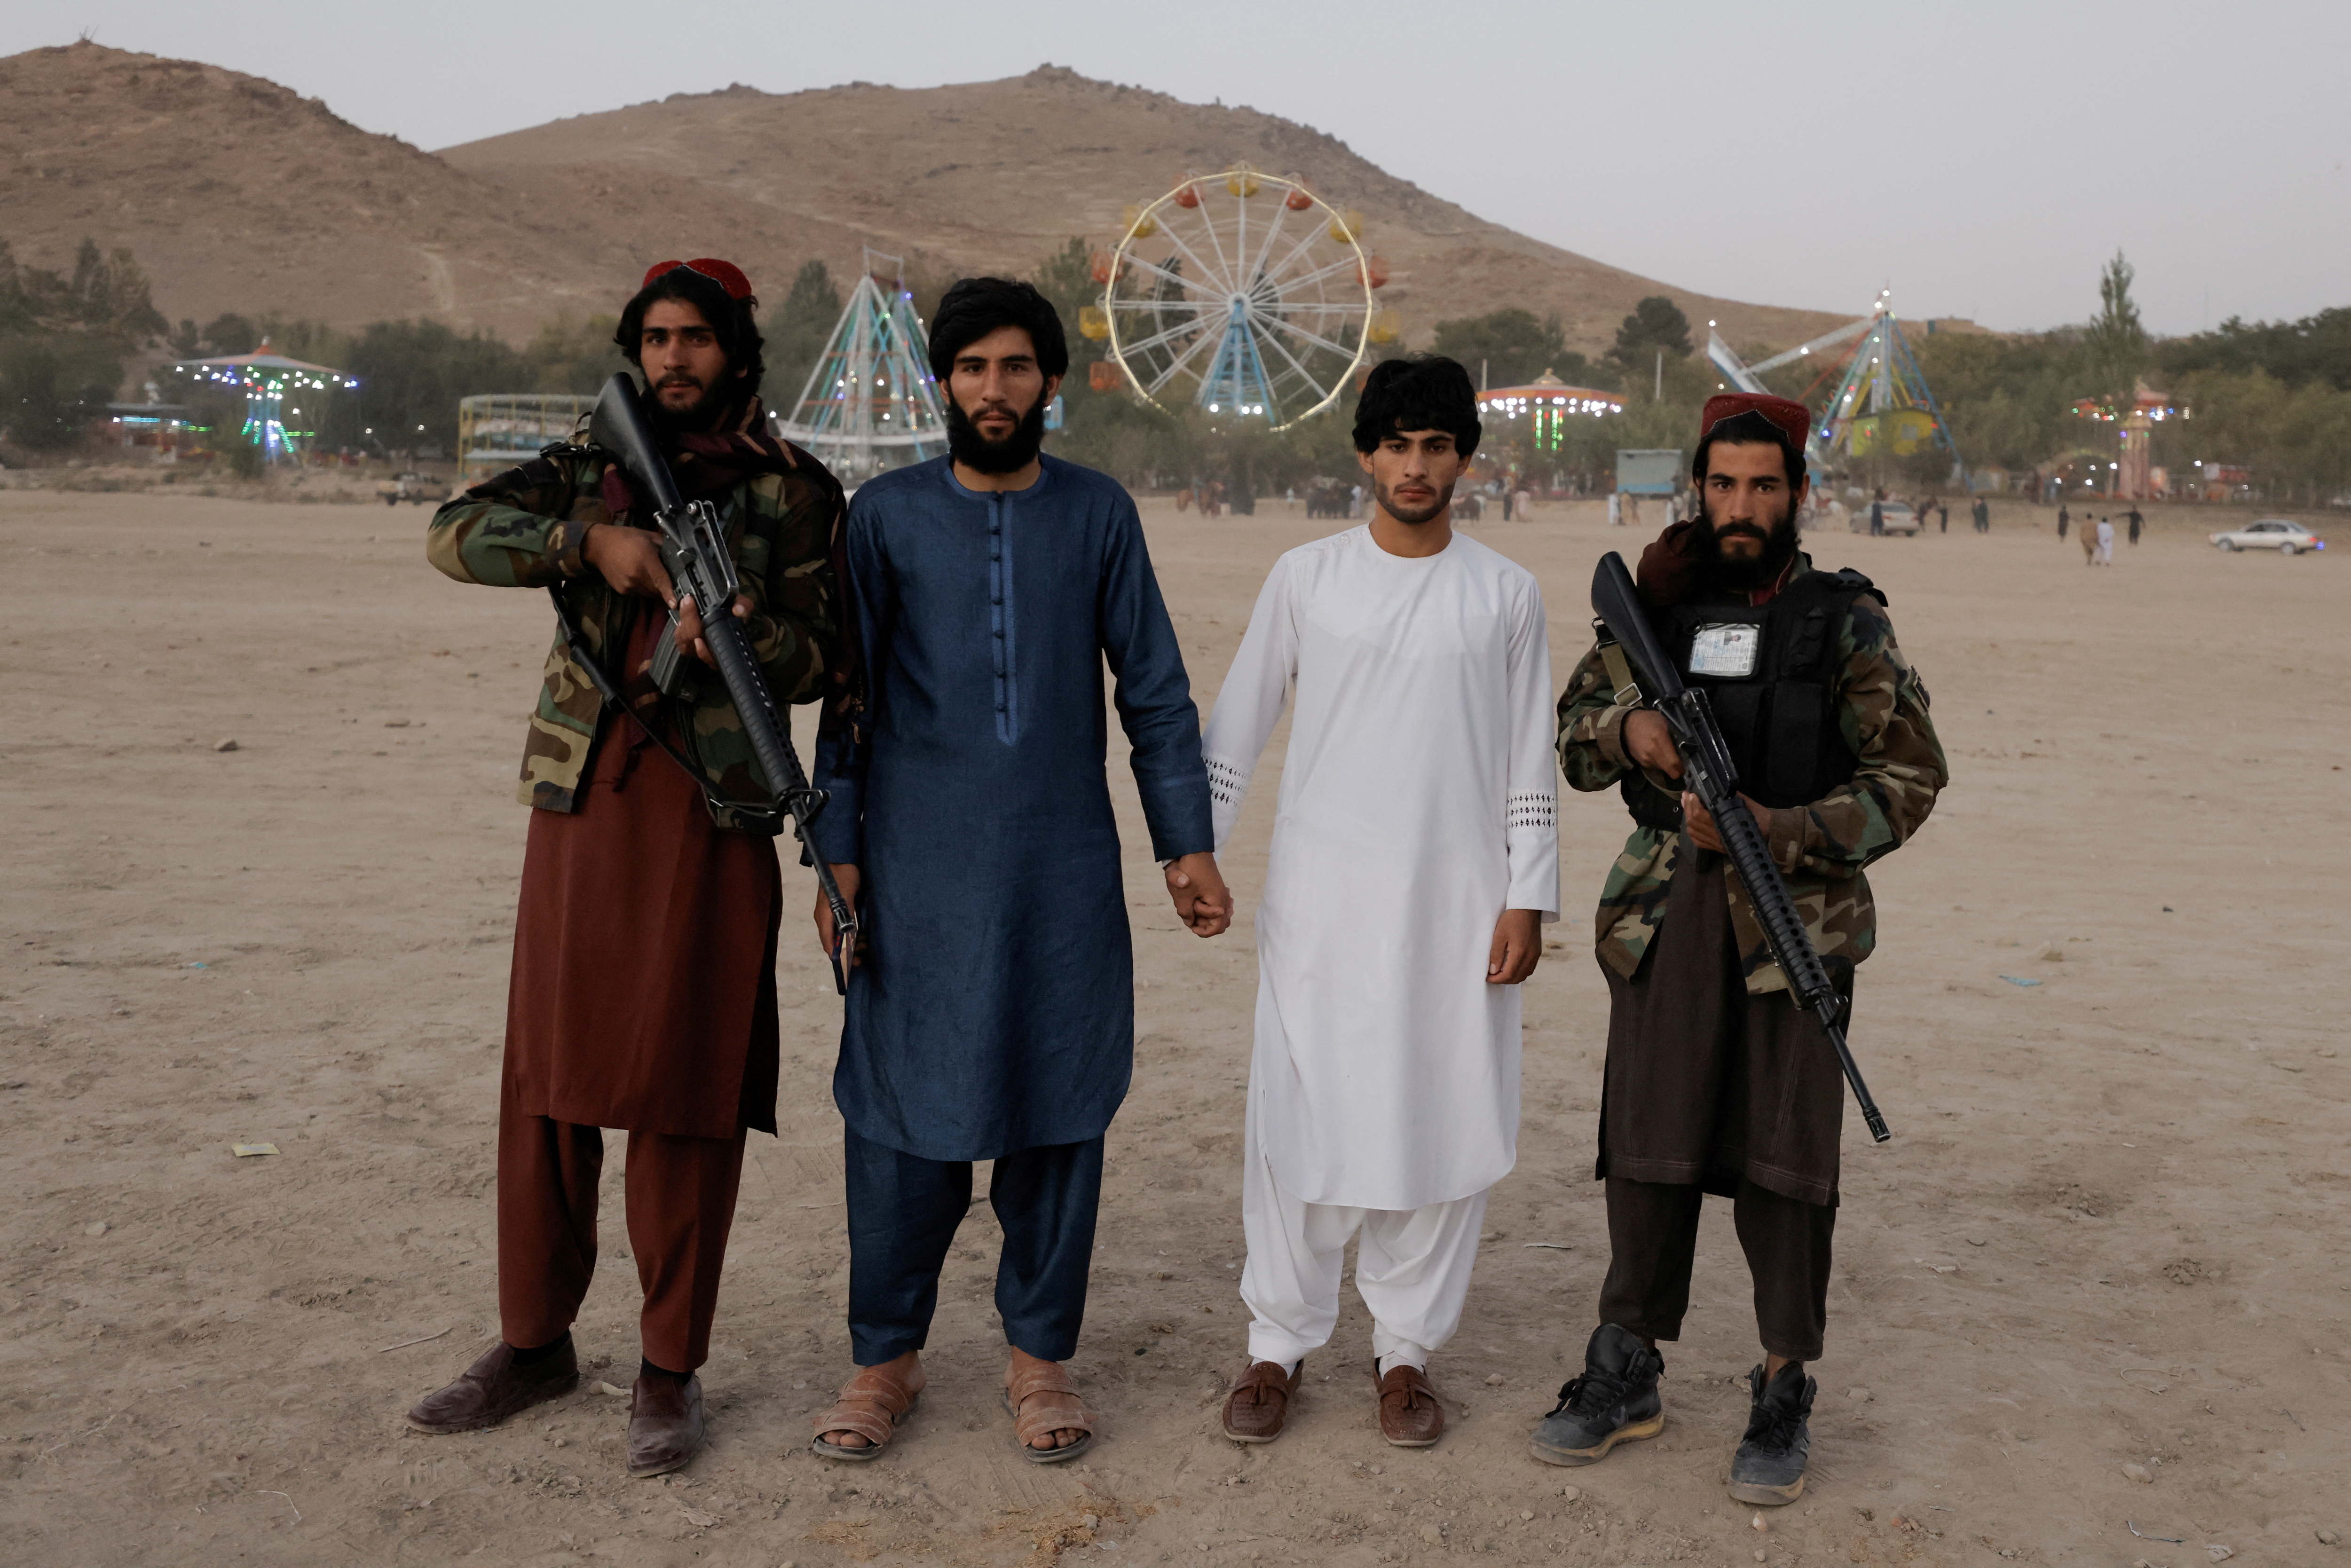 Taliban fighters no longer allowed to carry assault rifles in amusement parks